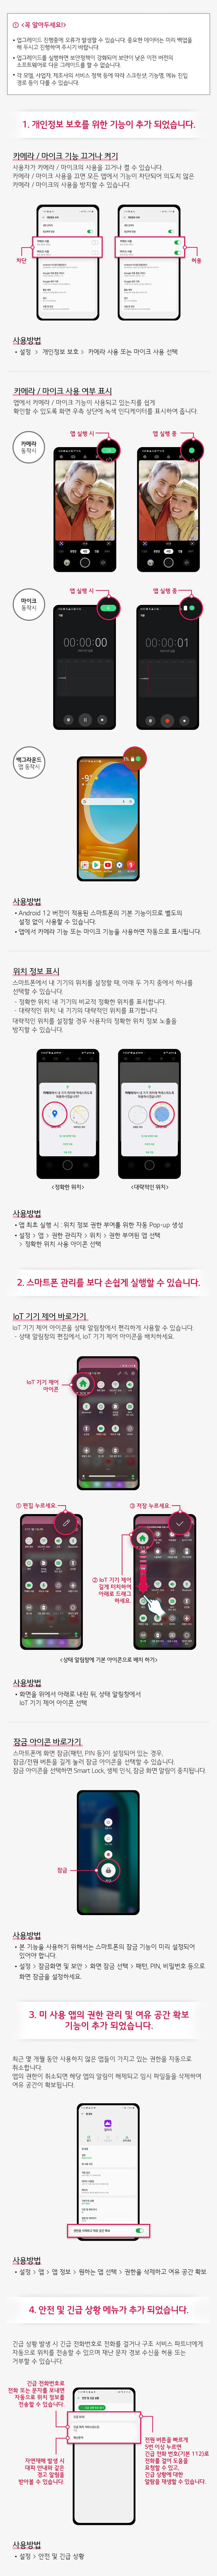 LG showcases Android 12 changes with LG Velvet OS update 